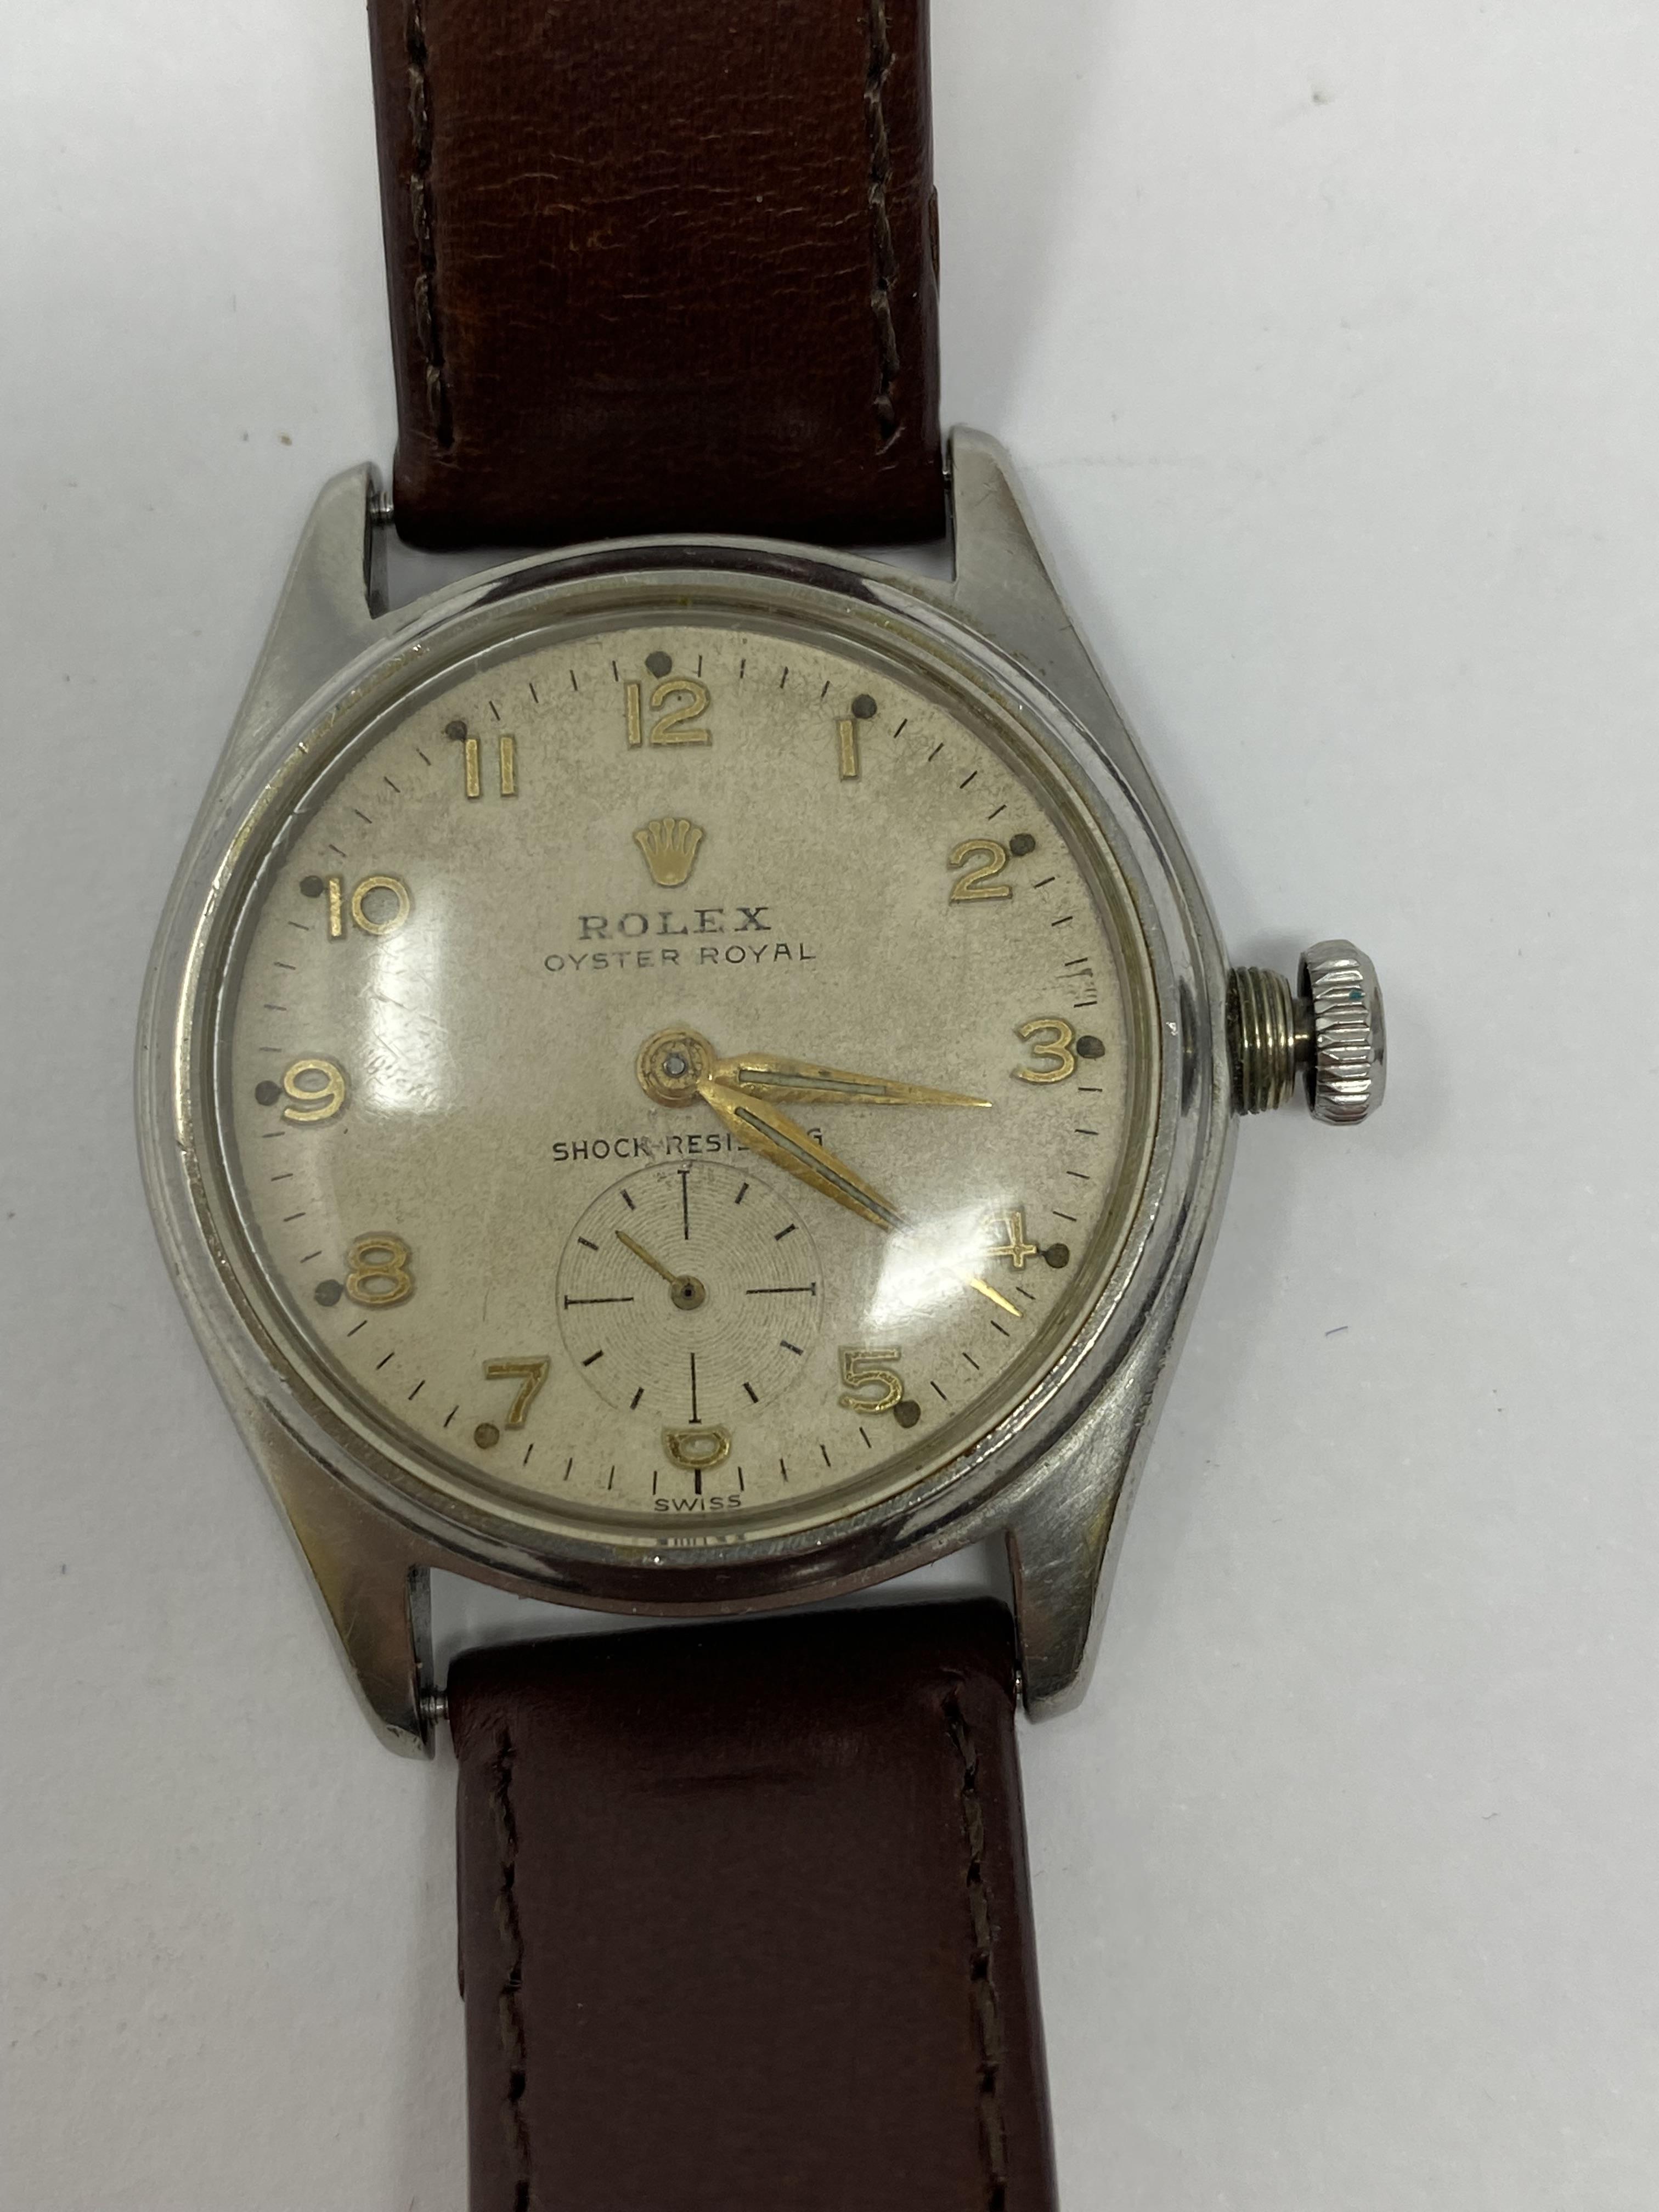 ROLEX OYSTER ROYAL, REF.6044: A MID SIZE STAINLESS STEEL WRISTWATCH, CIRCA 1950 - Image 4 of 5